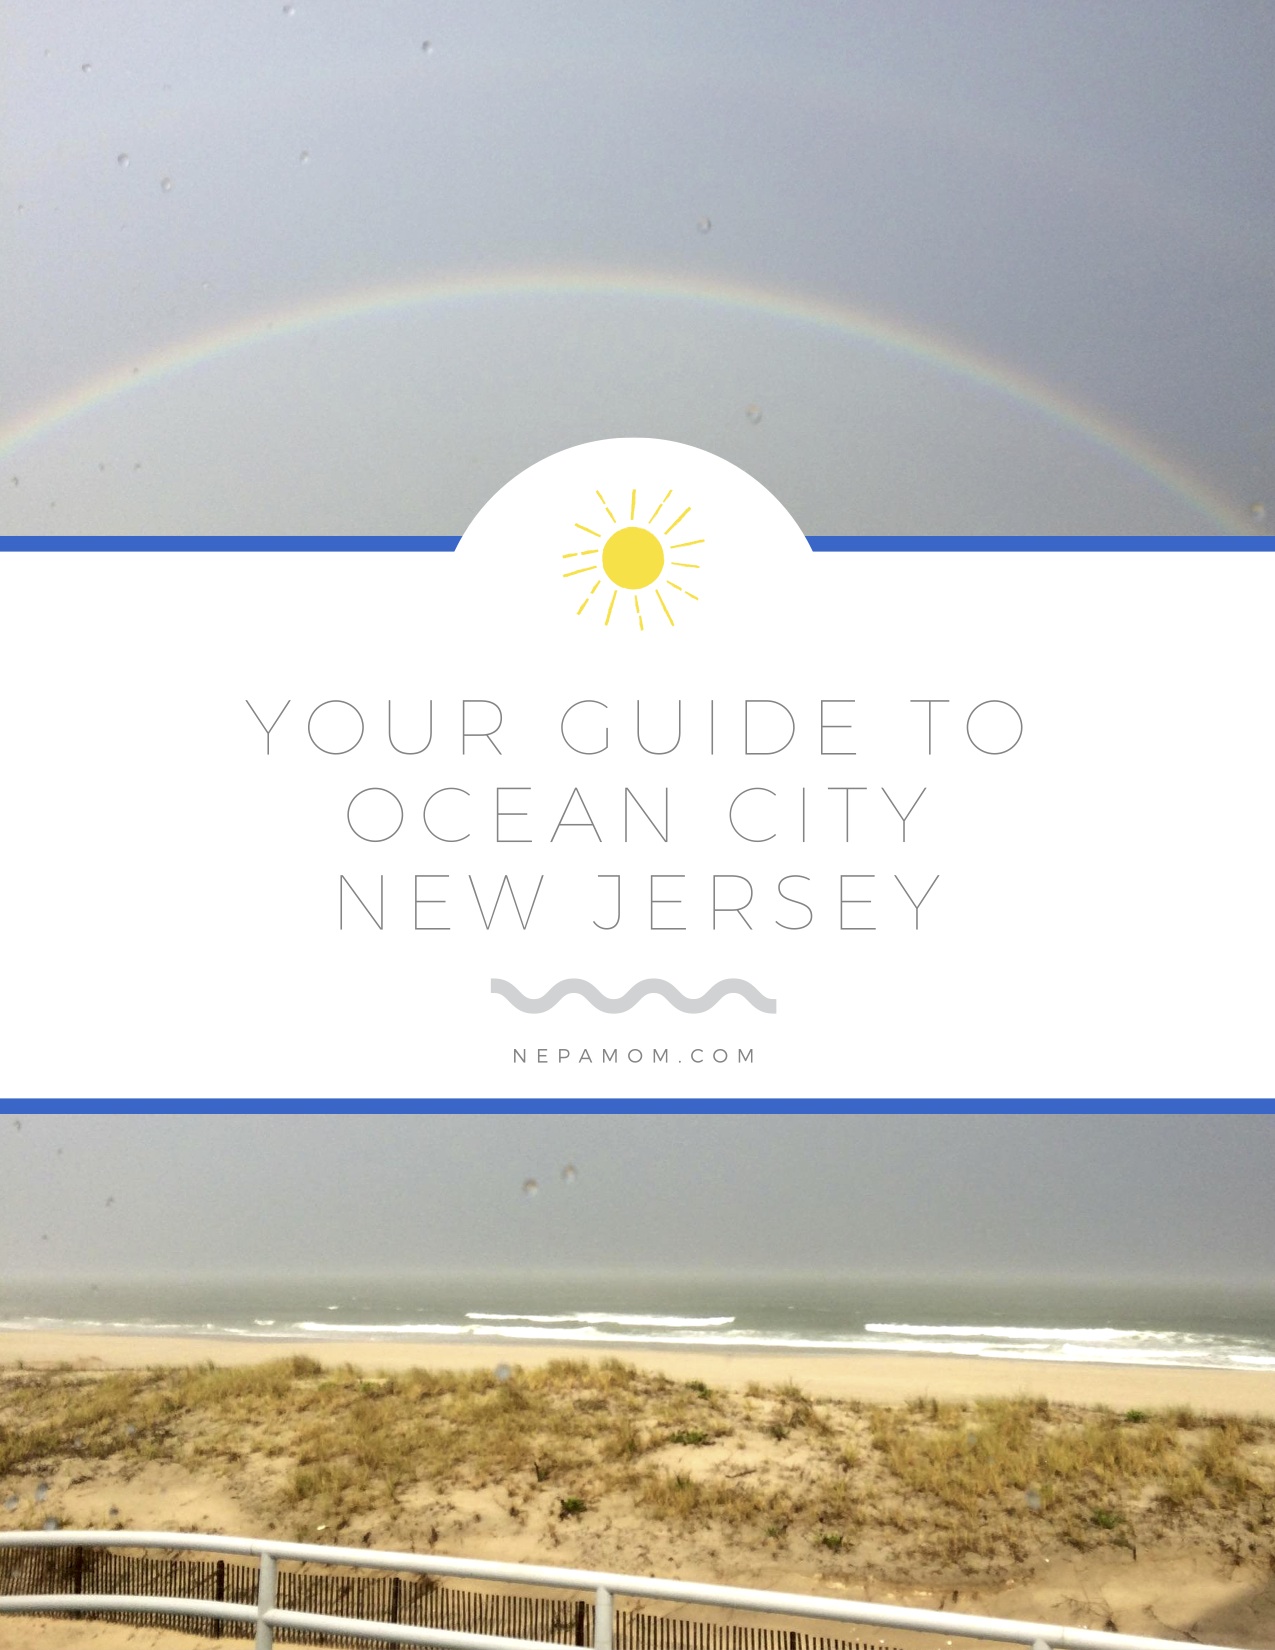 Guide to Ocean CIty New Jersey